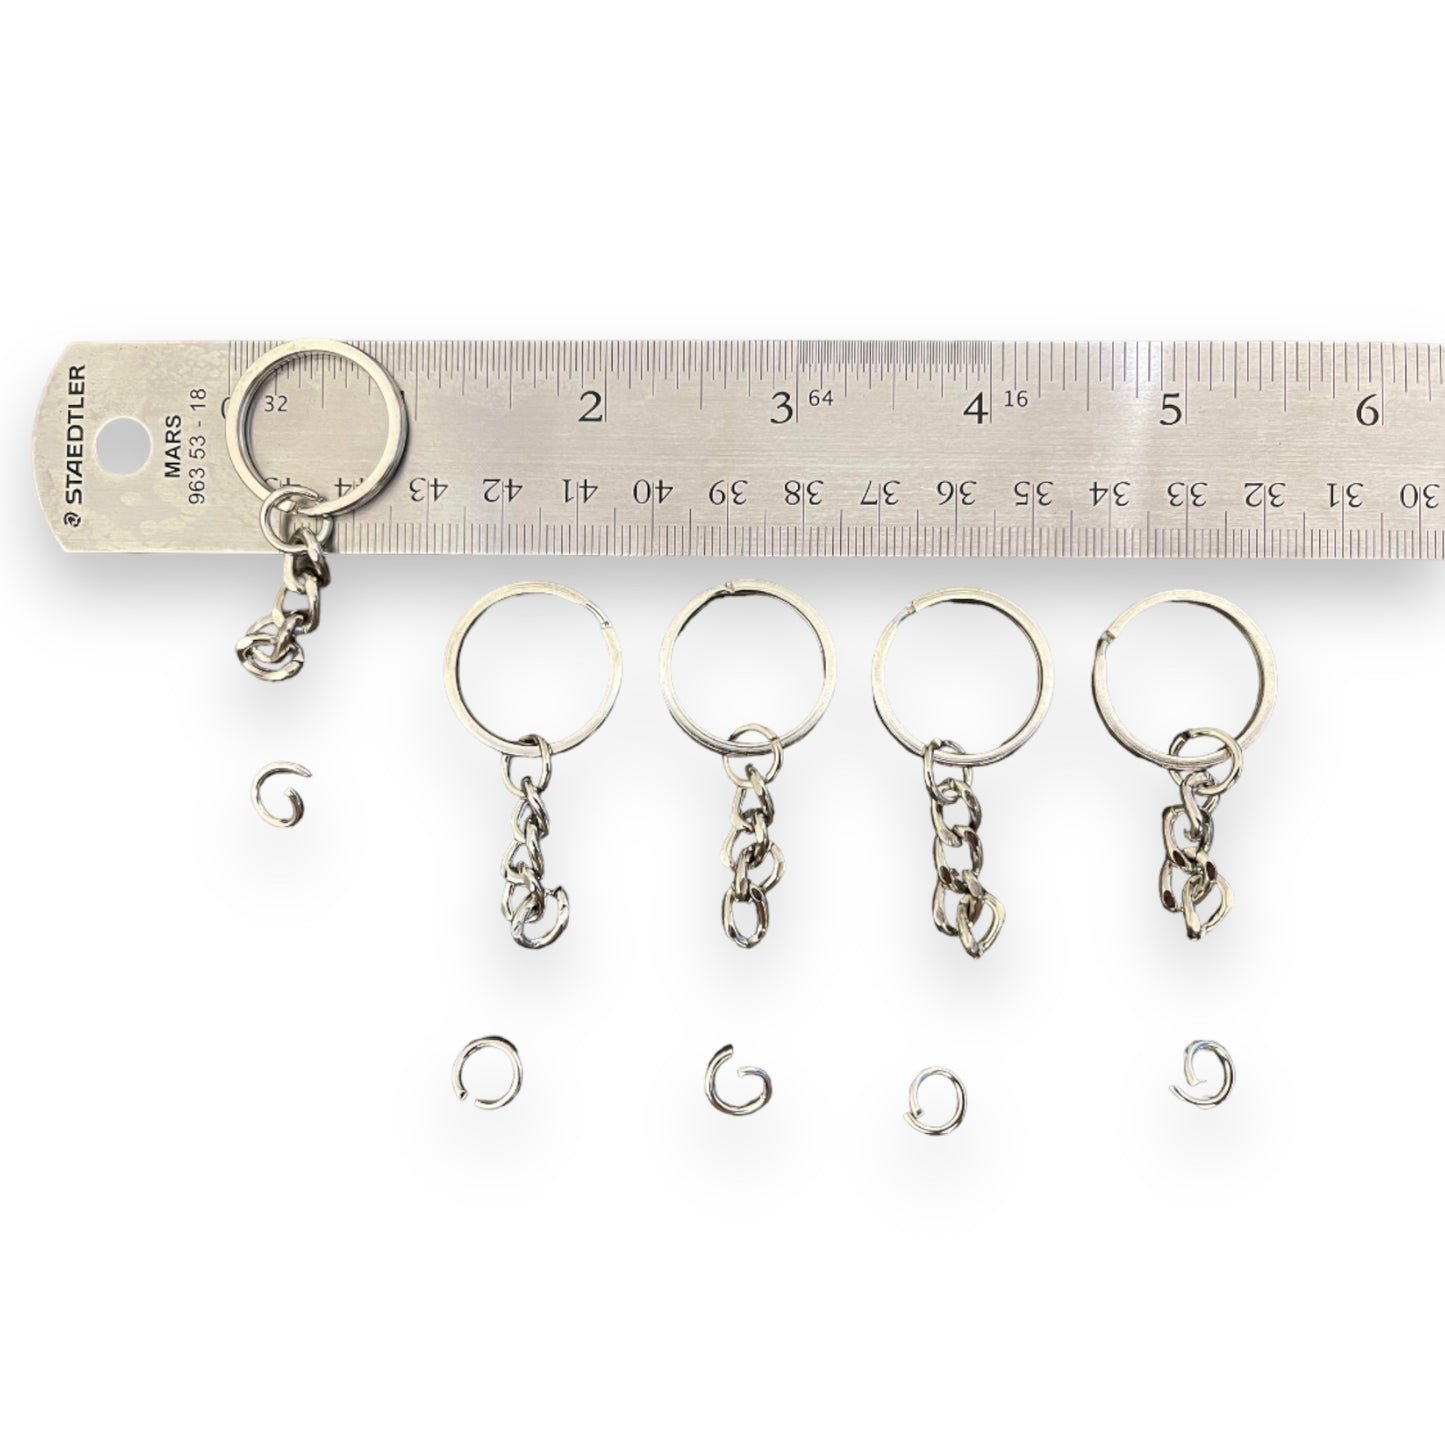 Split Key Ring with Chain and Jump Ring (Set of 5) - Pioneer Supplier & Creations